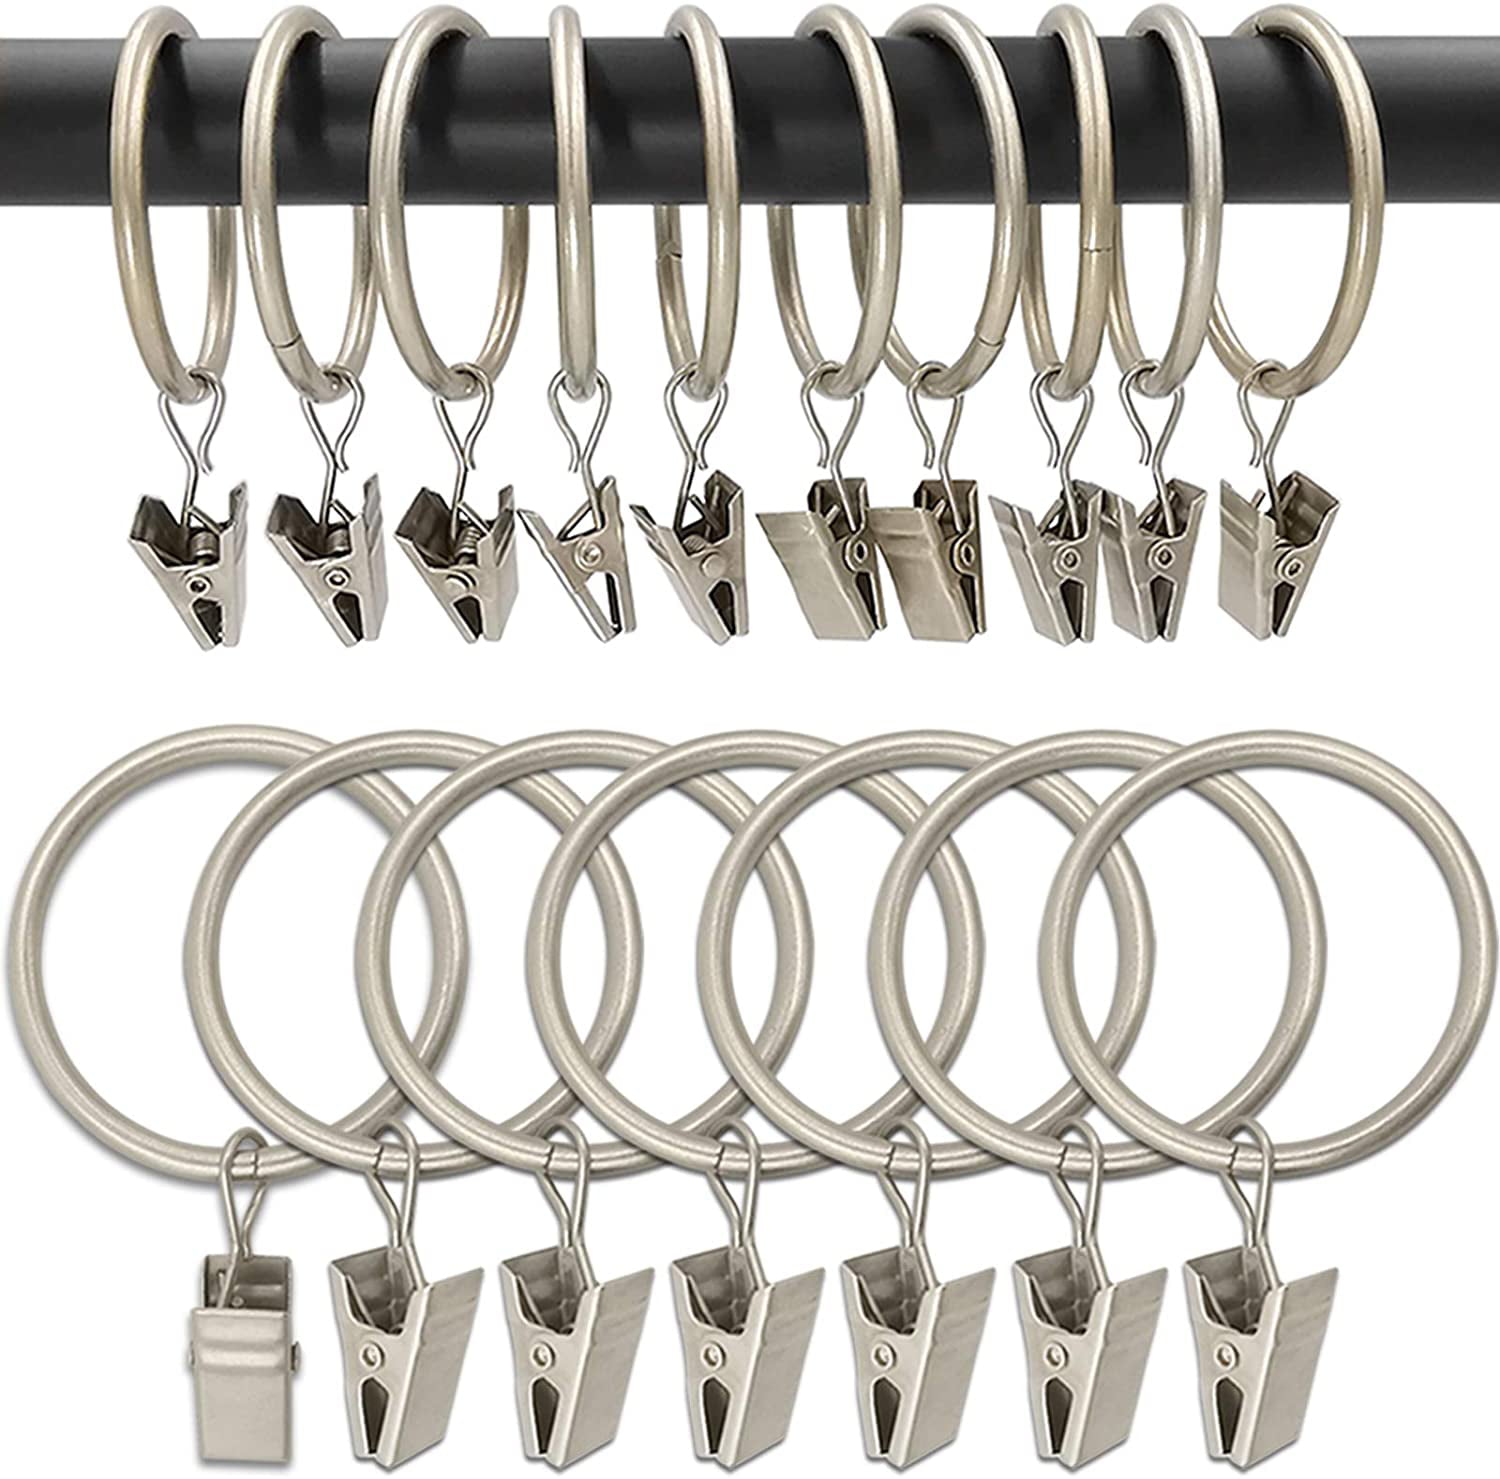 10 Metal Curtain Rings Clip Clamp Hooks Peg Clasp Hang Hold Fabric BRASS Finish 